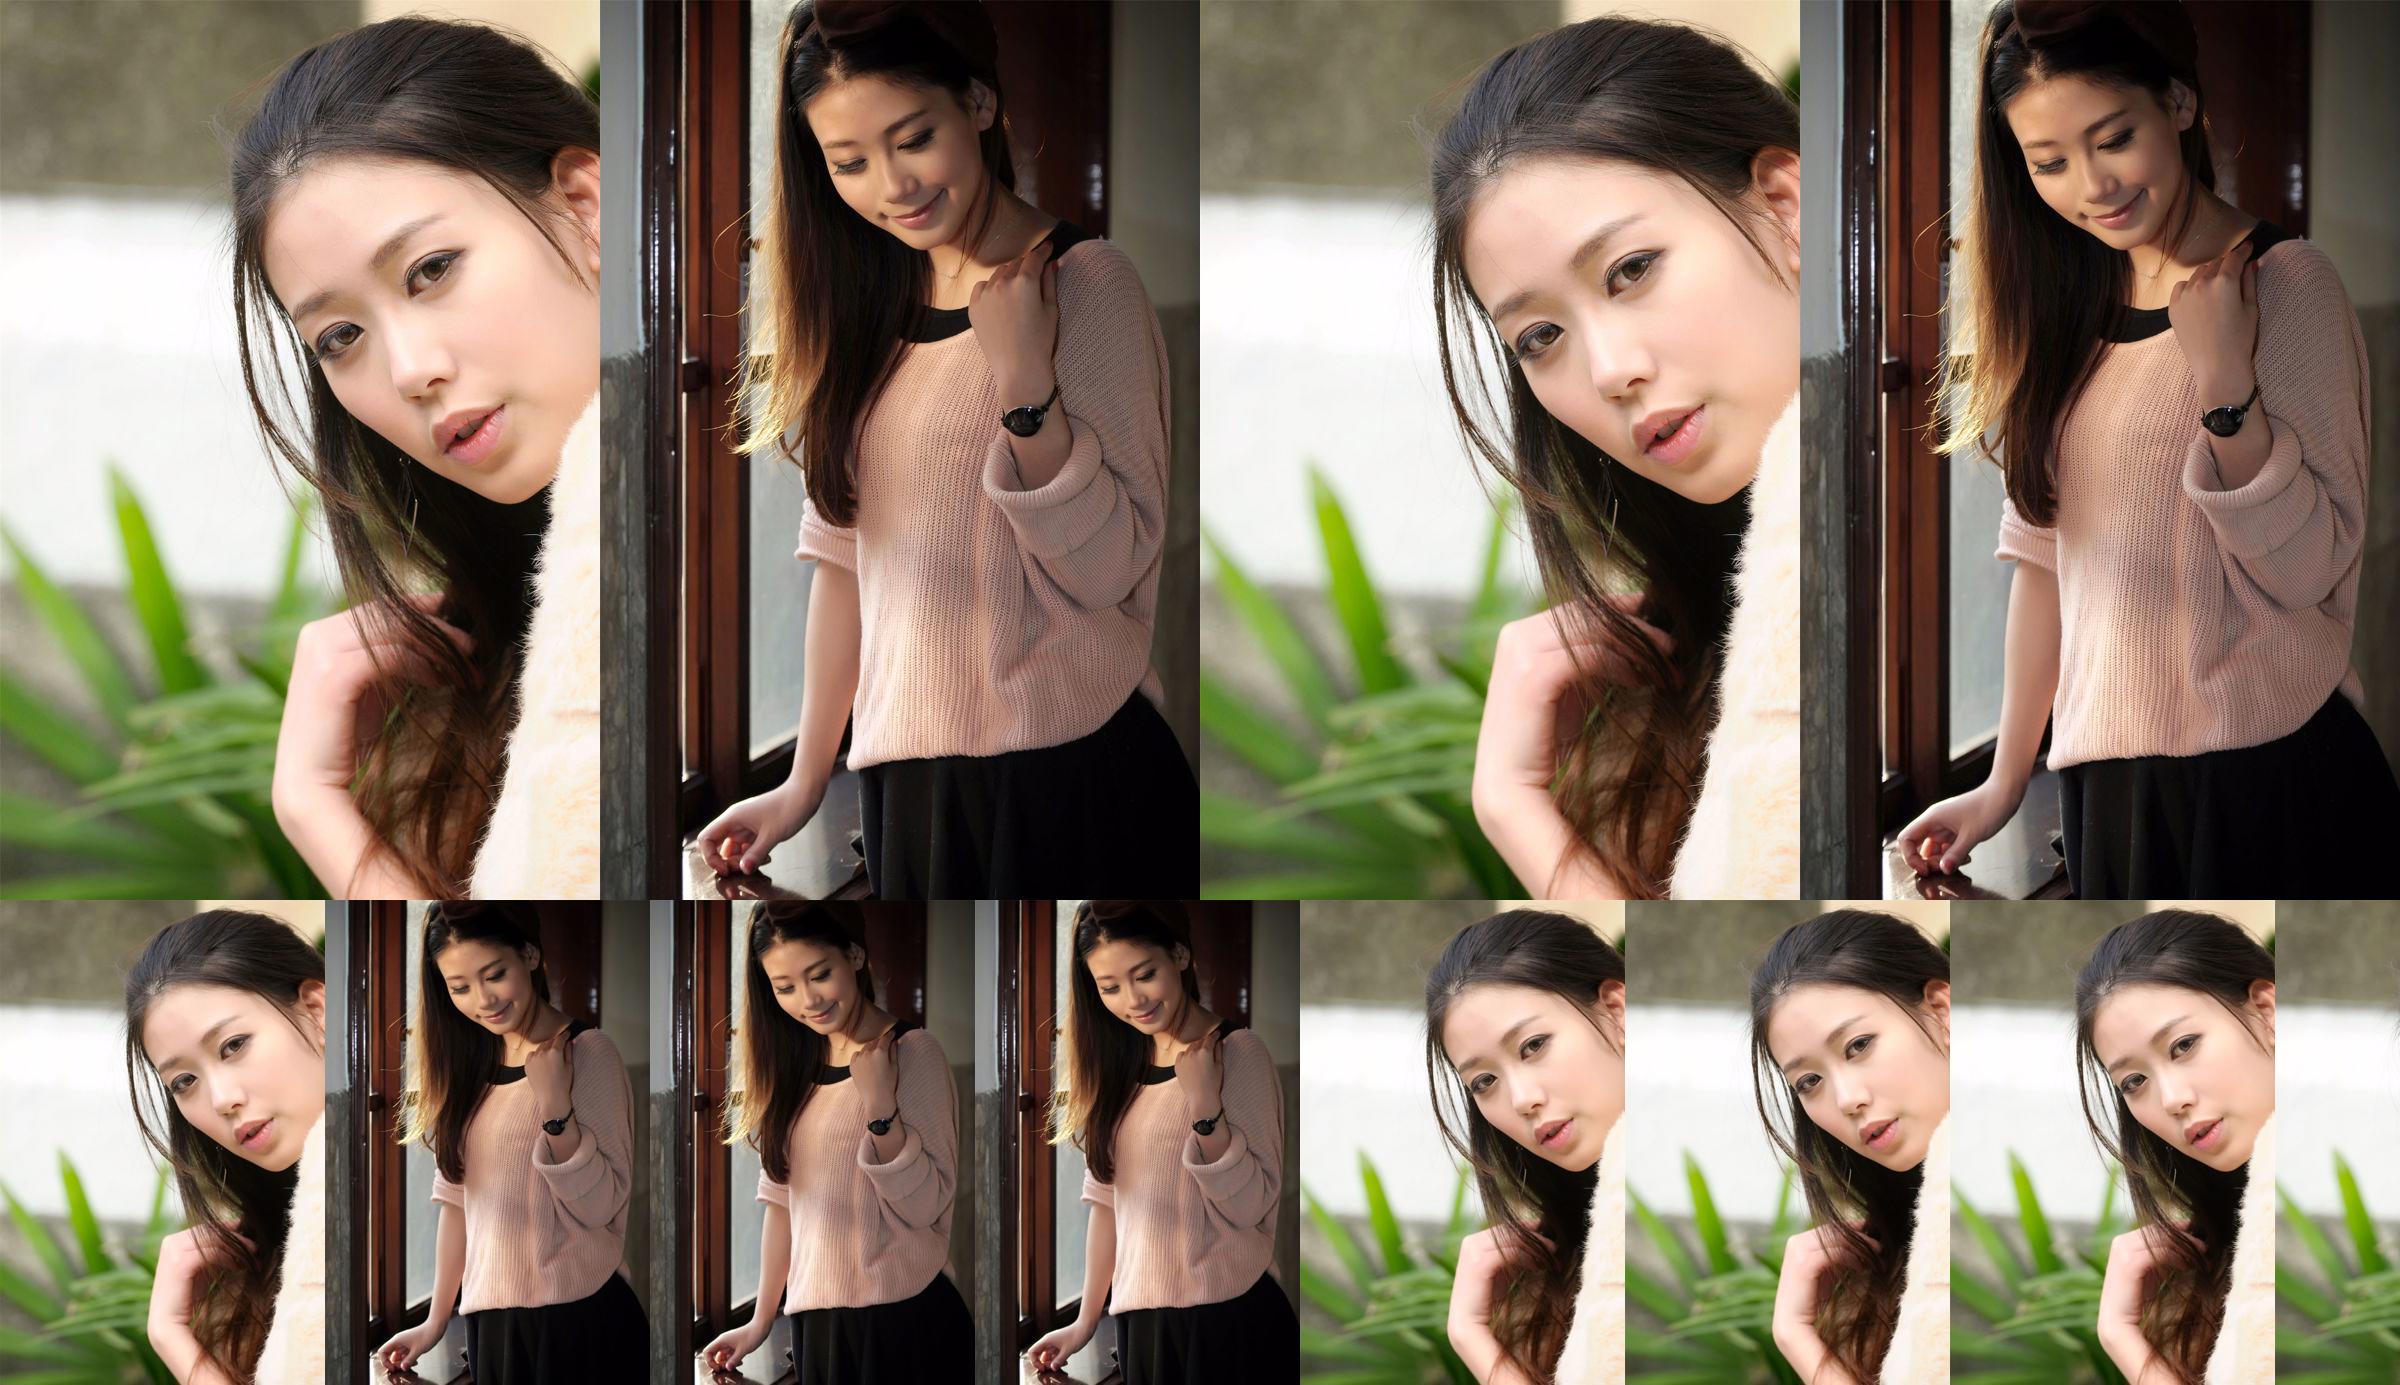 Taiwanese goddess Jia Belle "Aesthetic Fashion Outing" No.8b8b33 Page 4